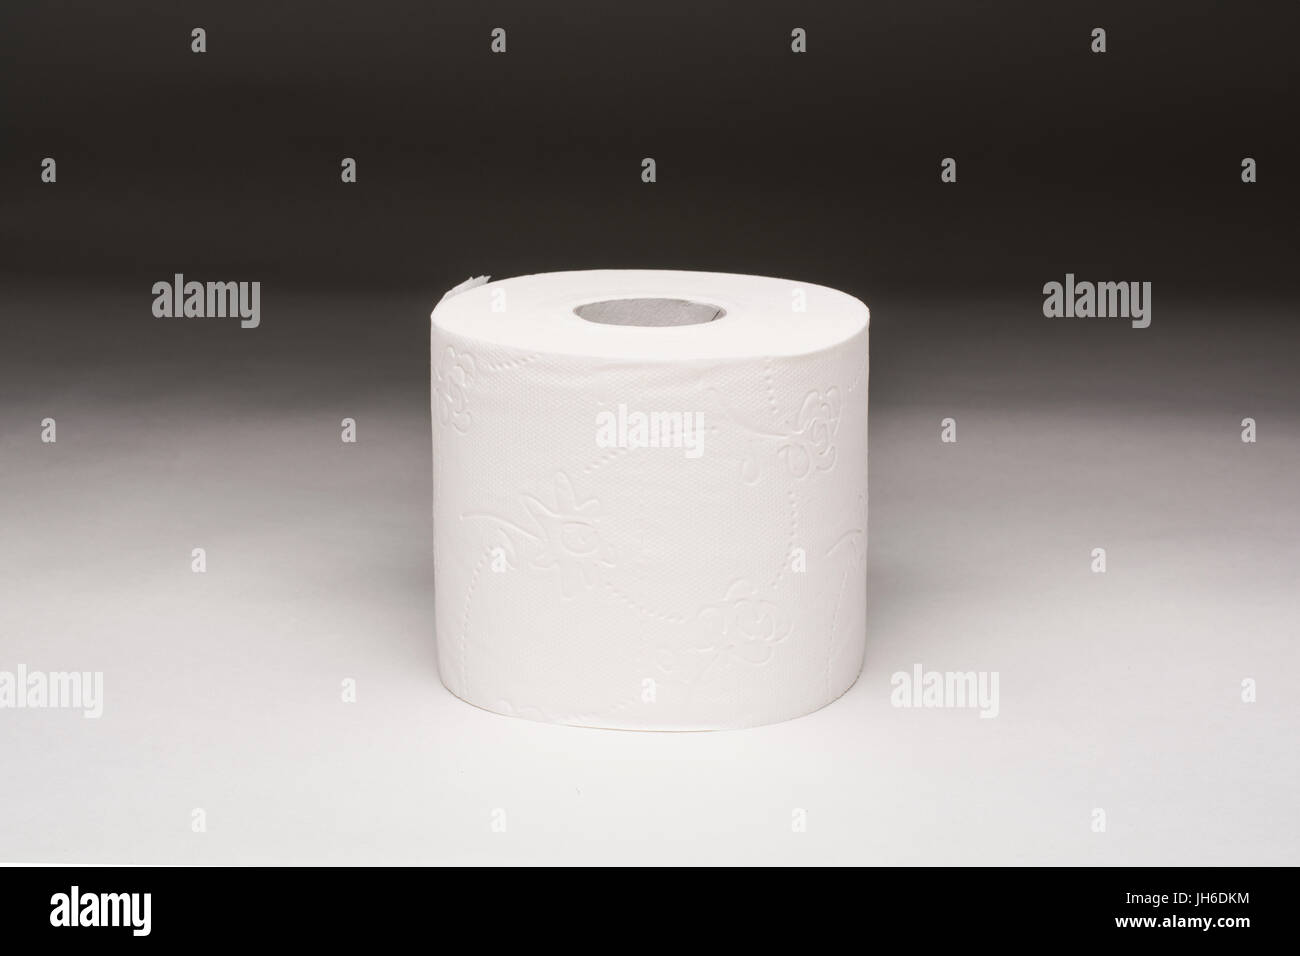 A toilet roll photographed on a graduated background Stock Photo